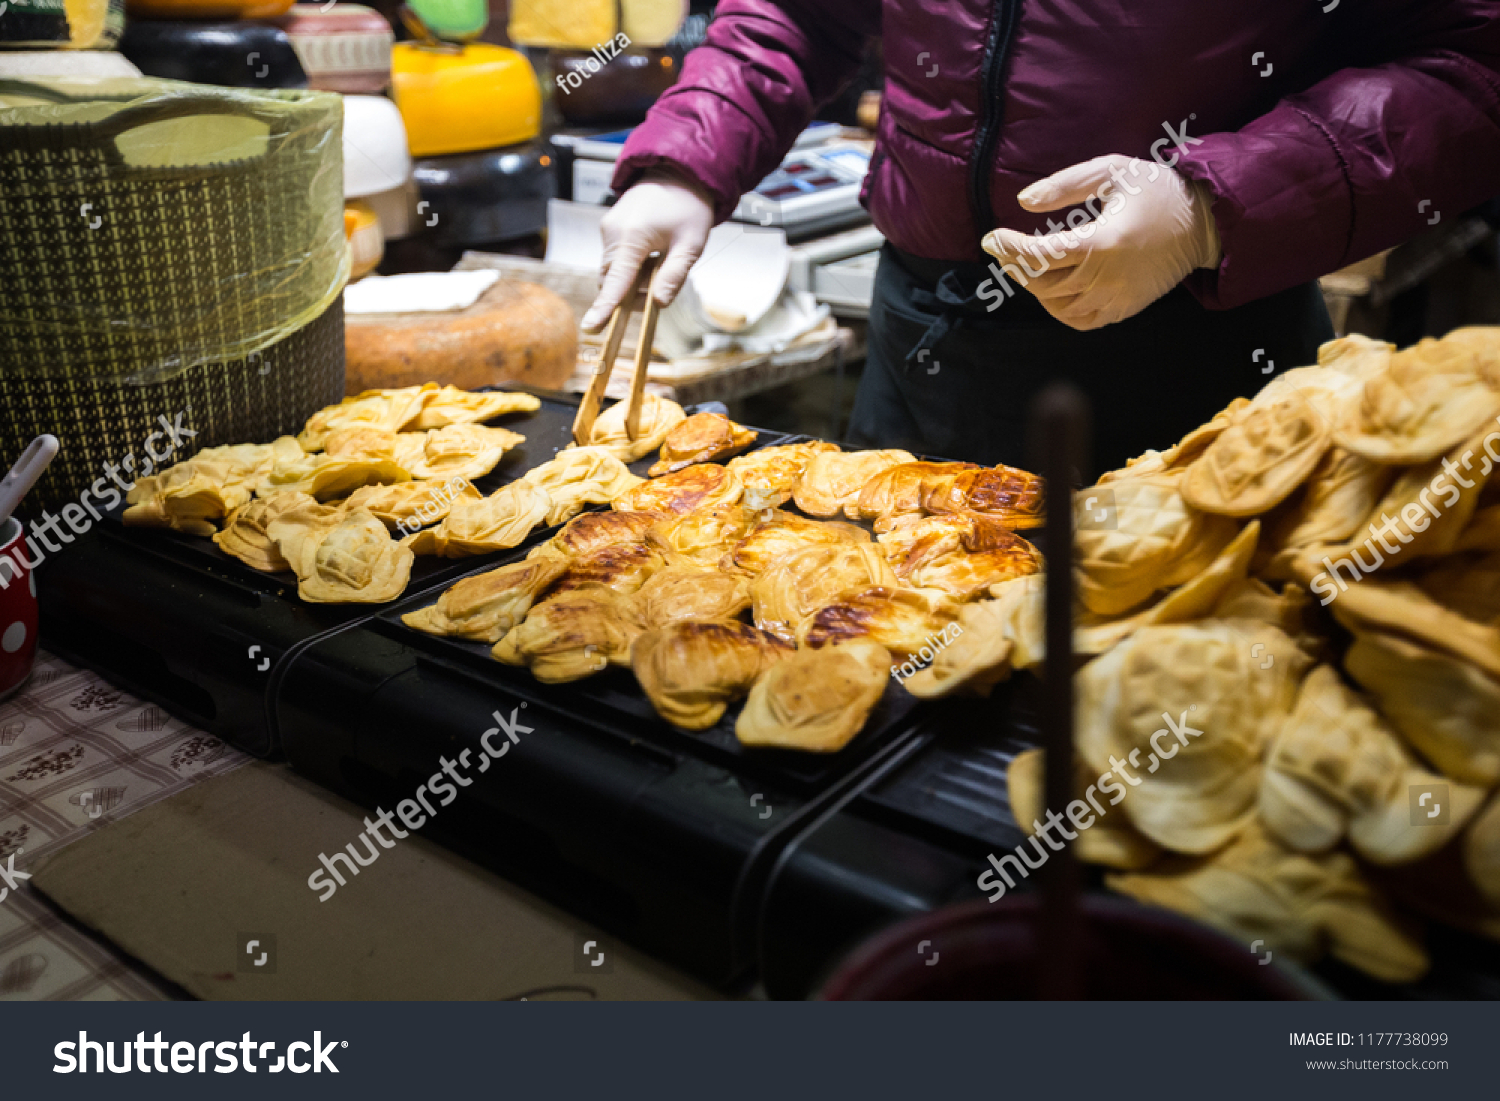 Theme is traditional street food in a European city on the market square in the Czech Republic Prague in the New Year's Eve, Christmas Eve festivities. Hands sell, prepare smoked cheese. #1177738099